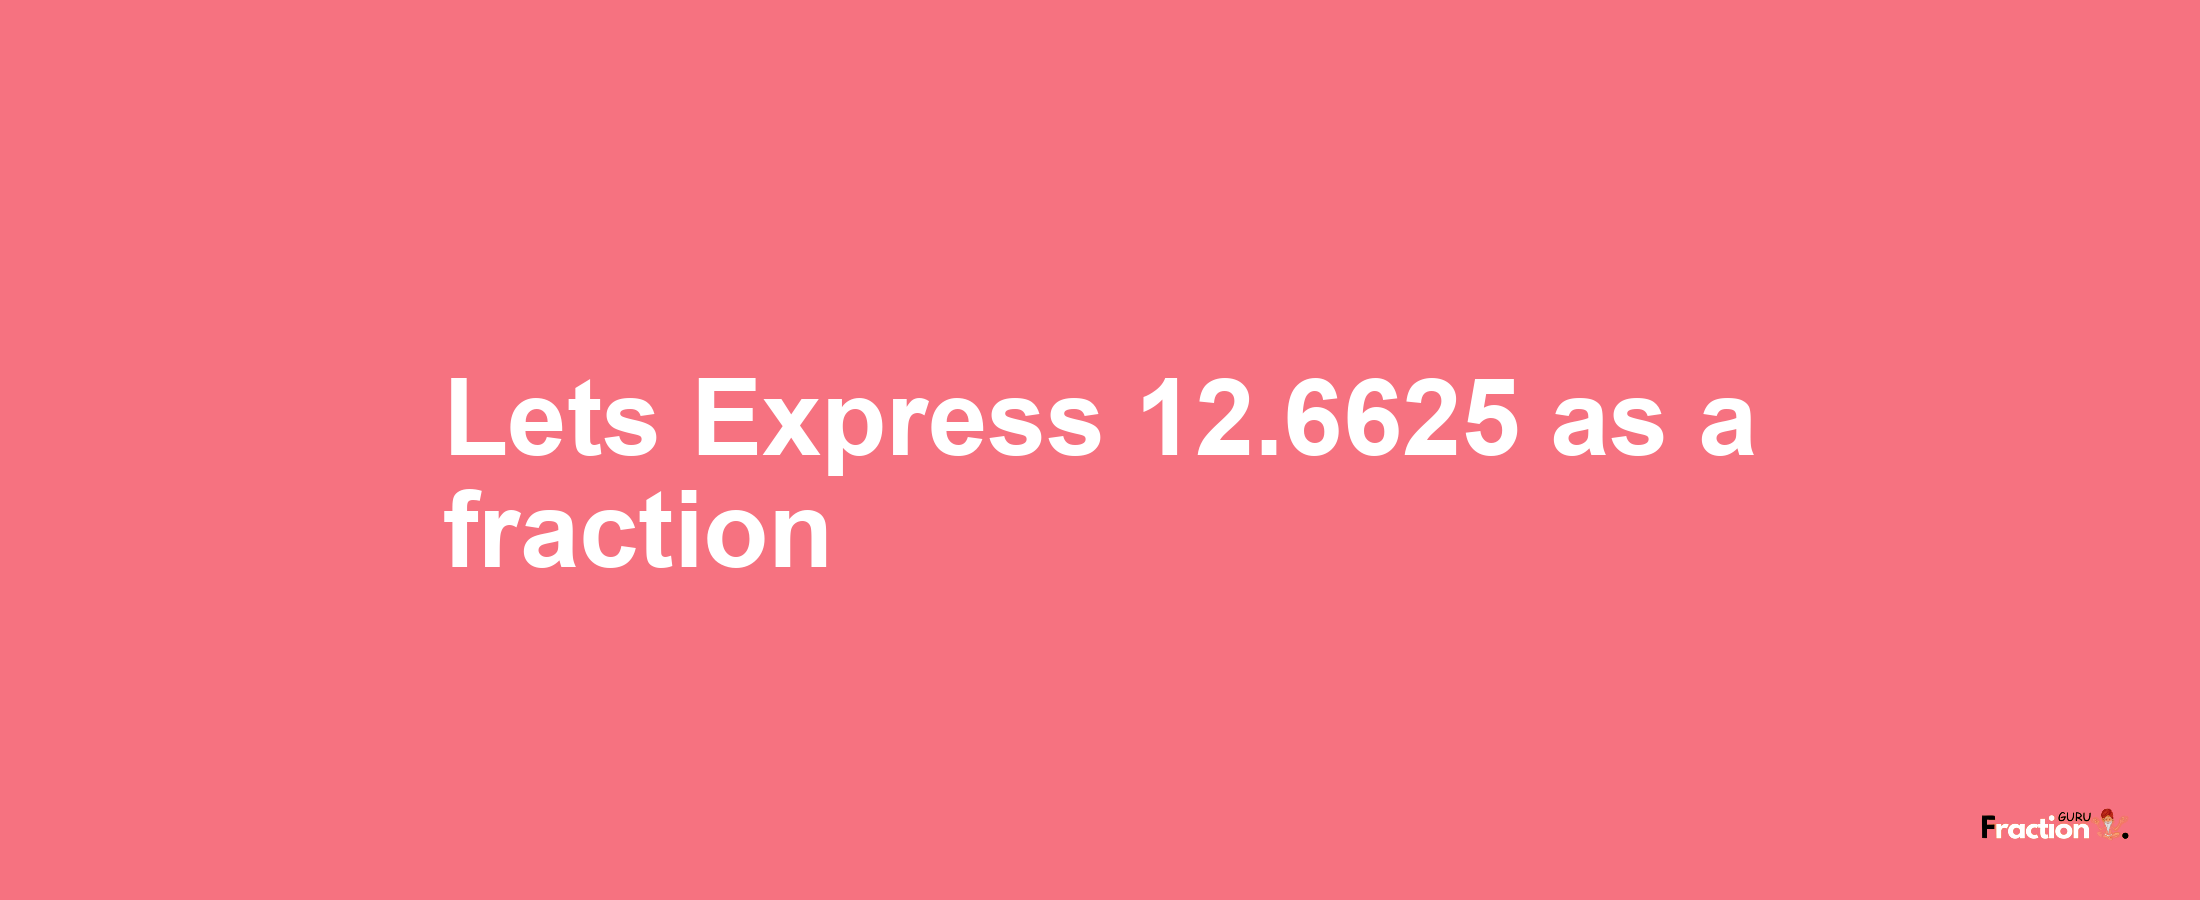 Lets Express 12.6625 as afraction